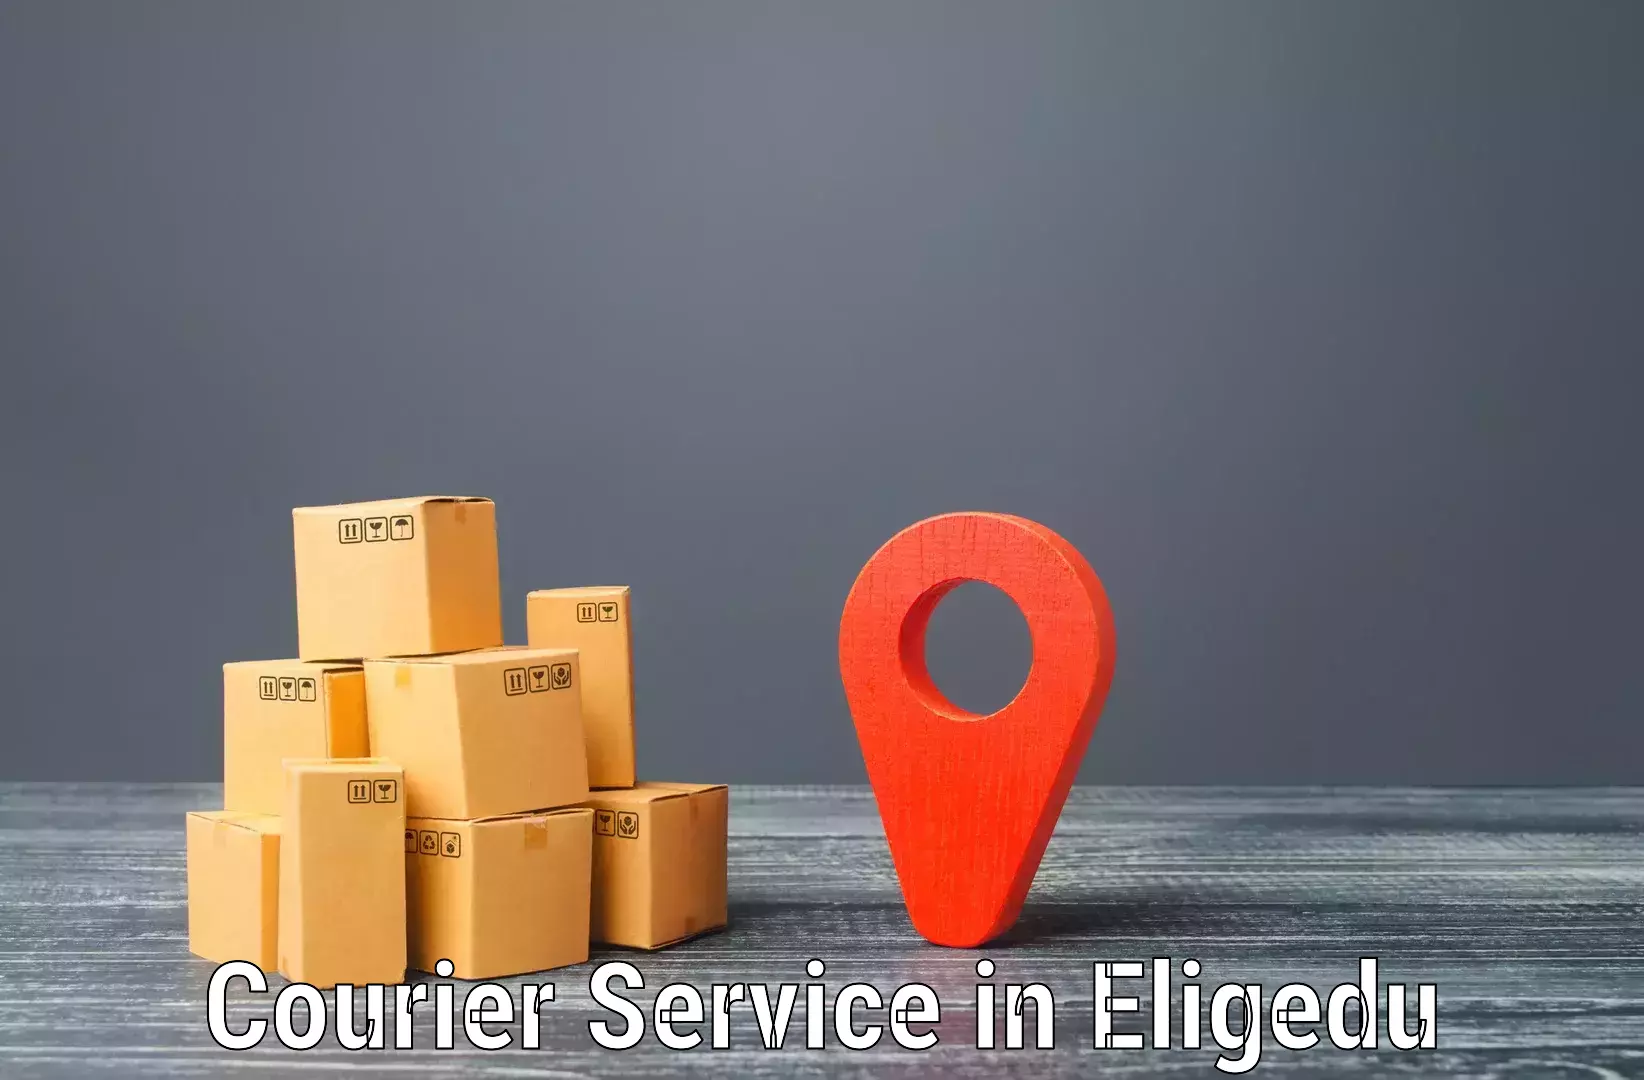 Courier service innovation in Eligedu